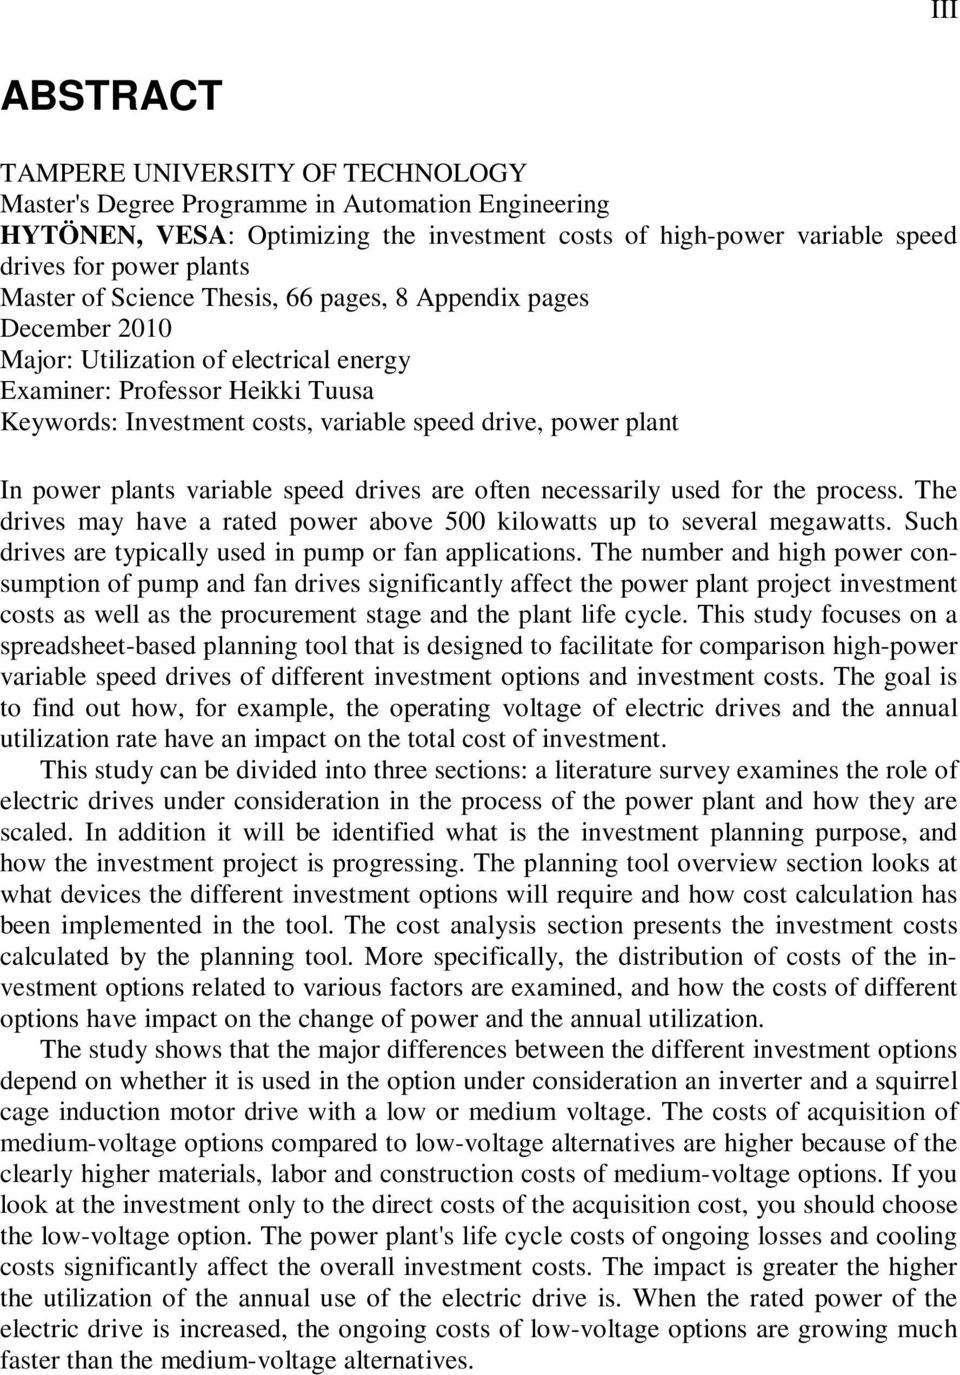 plant In power plants variable speed drives are often necessarily used for the process. The drives may have a rated power above 500 kilowatts up to several megawatts.